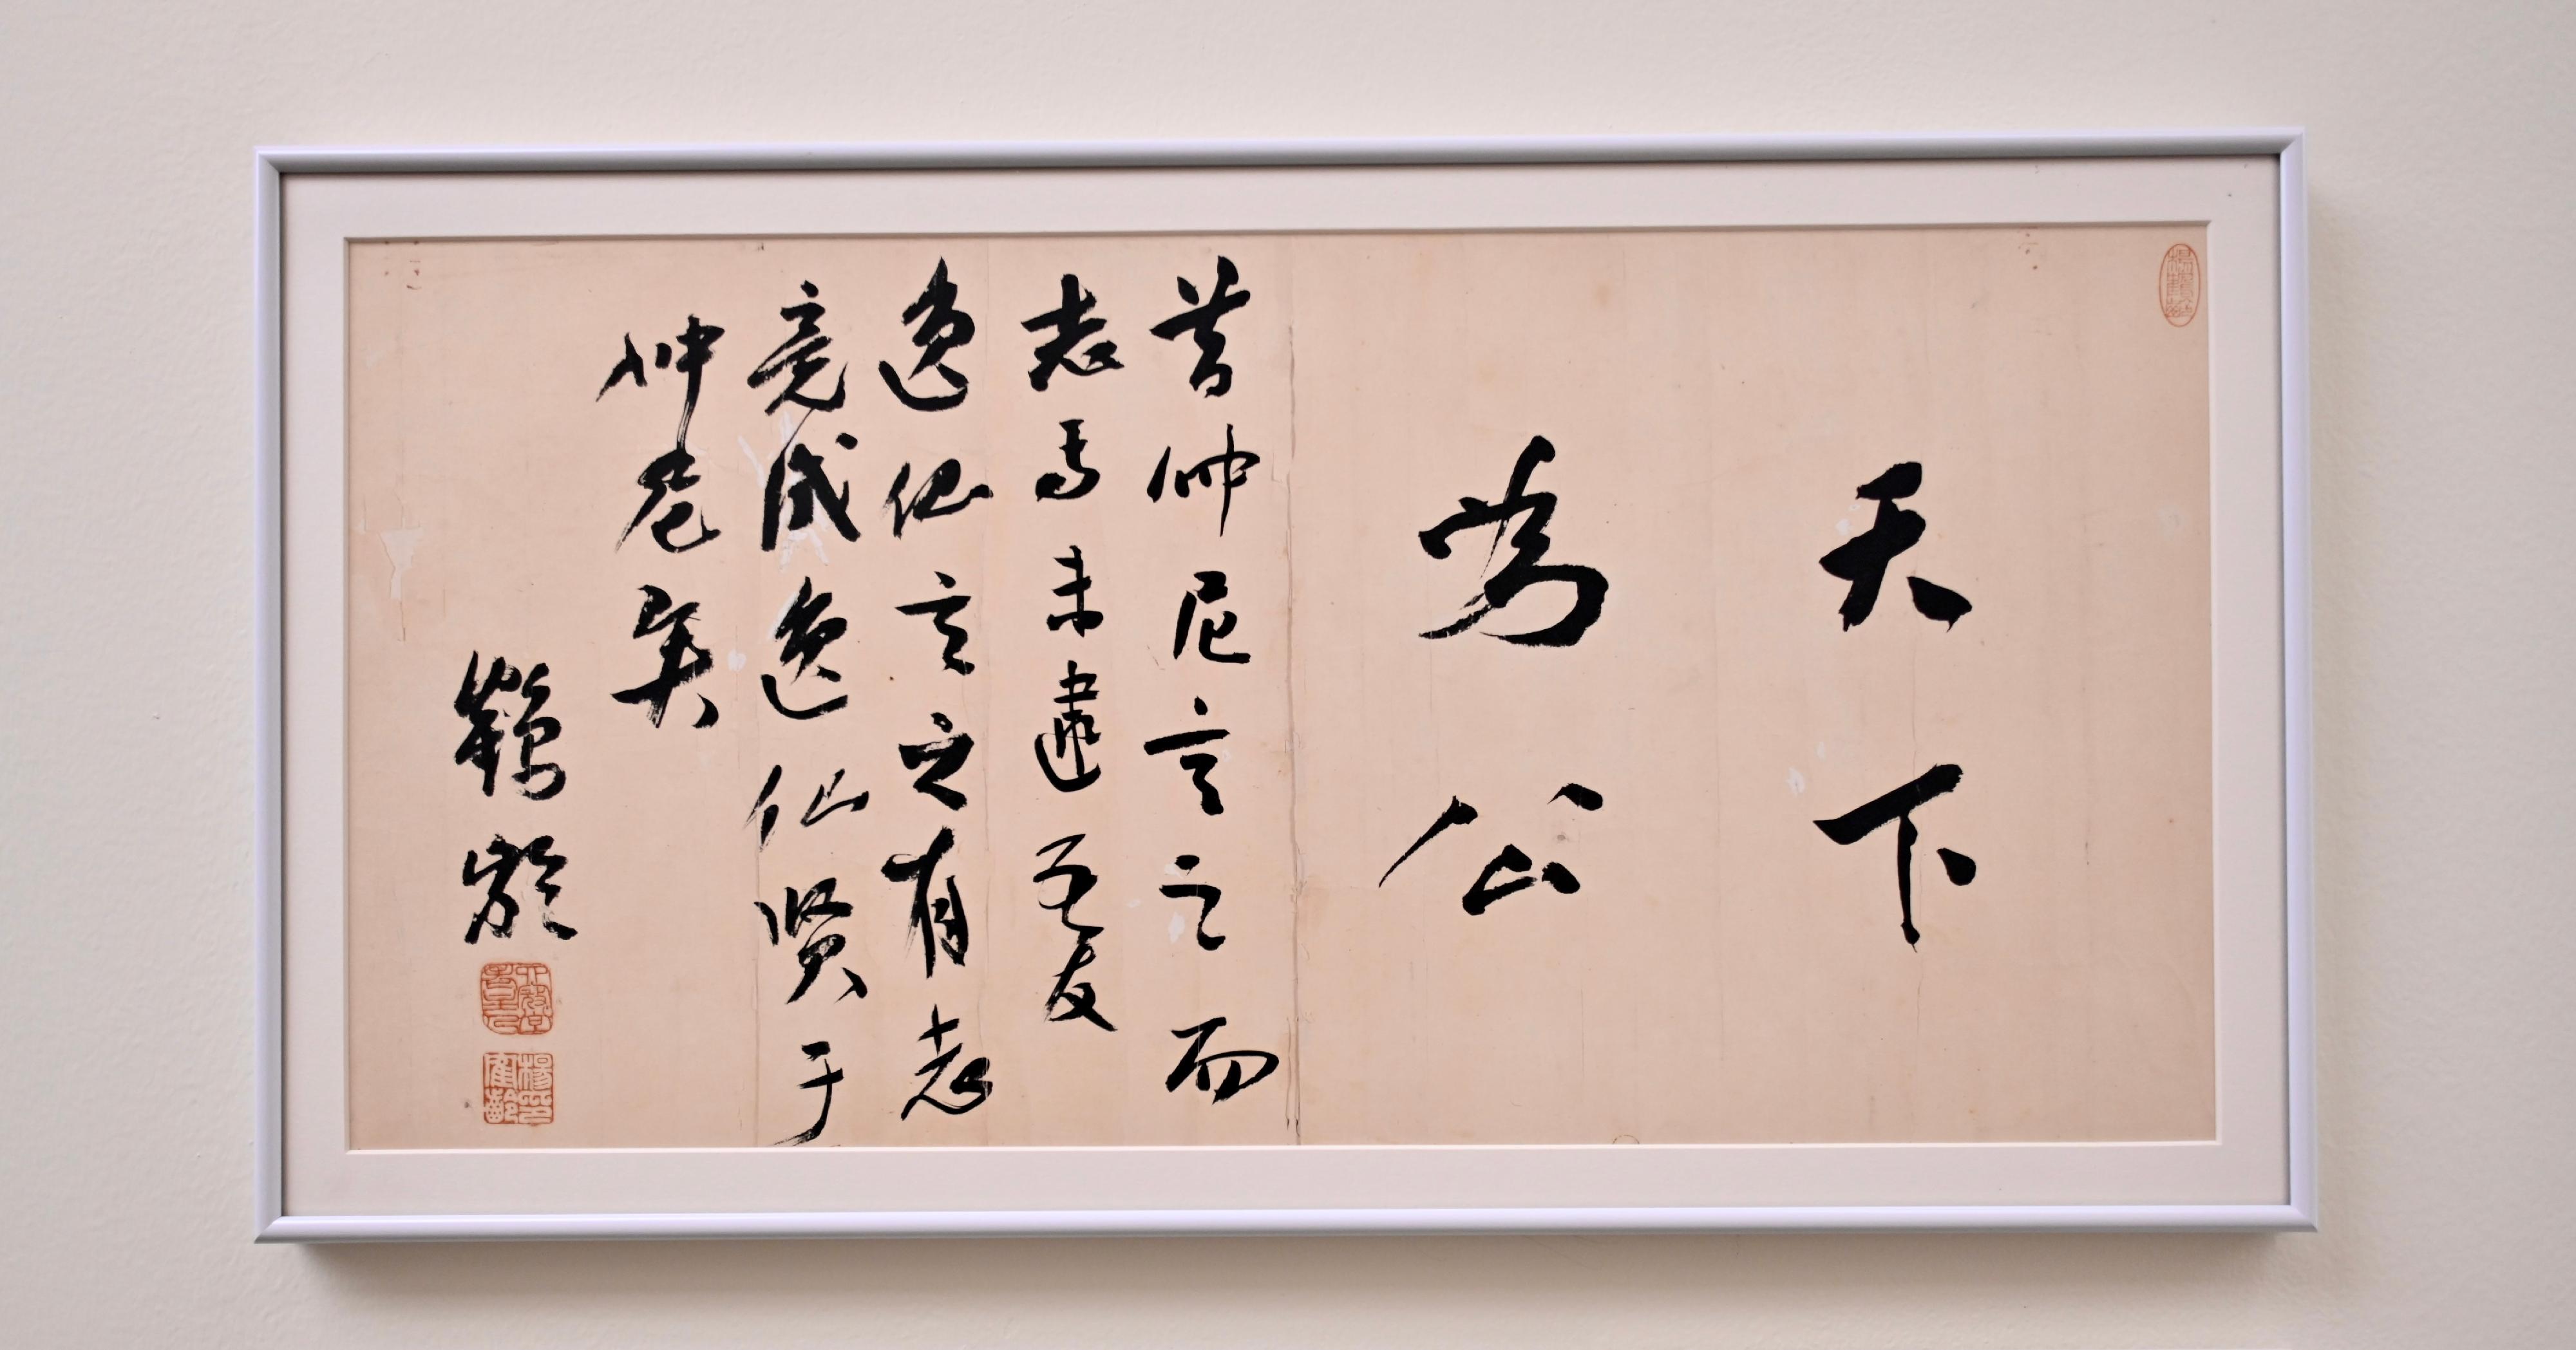 The Dr Sun Yat-sen Museum will hold the thematic exhibition "The Four Great Outlaws - Reshaping the Memories of the Revolution through a Photo" from tomorrow (December 10). Picture shows the inscription of Tian Xia Wei Gong (the World is for All) by Yeung Hok-ling (replica).